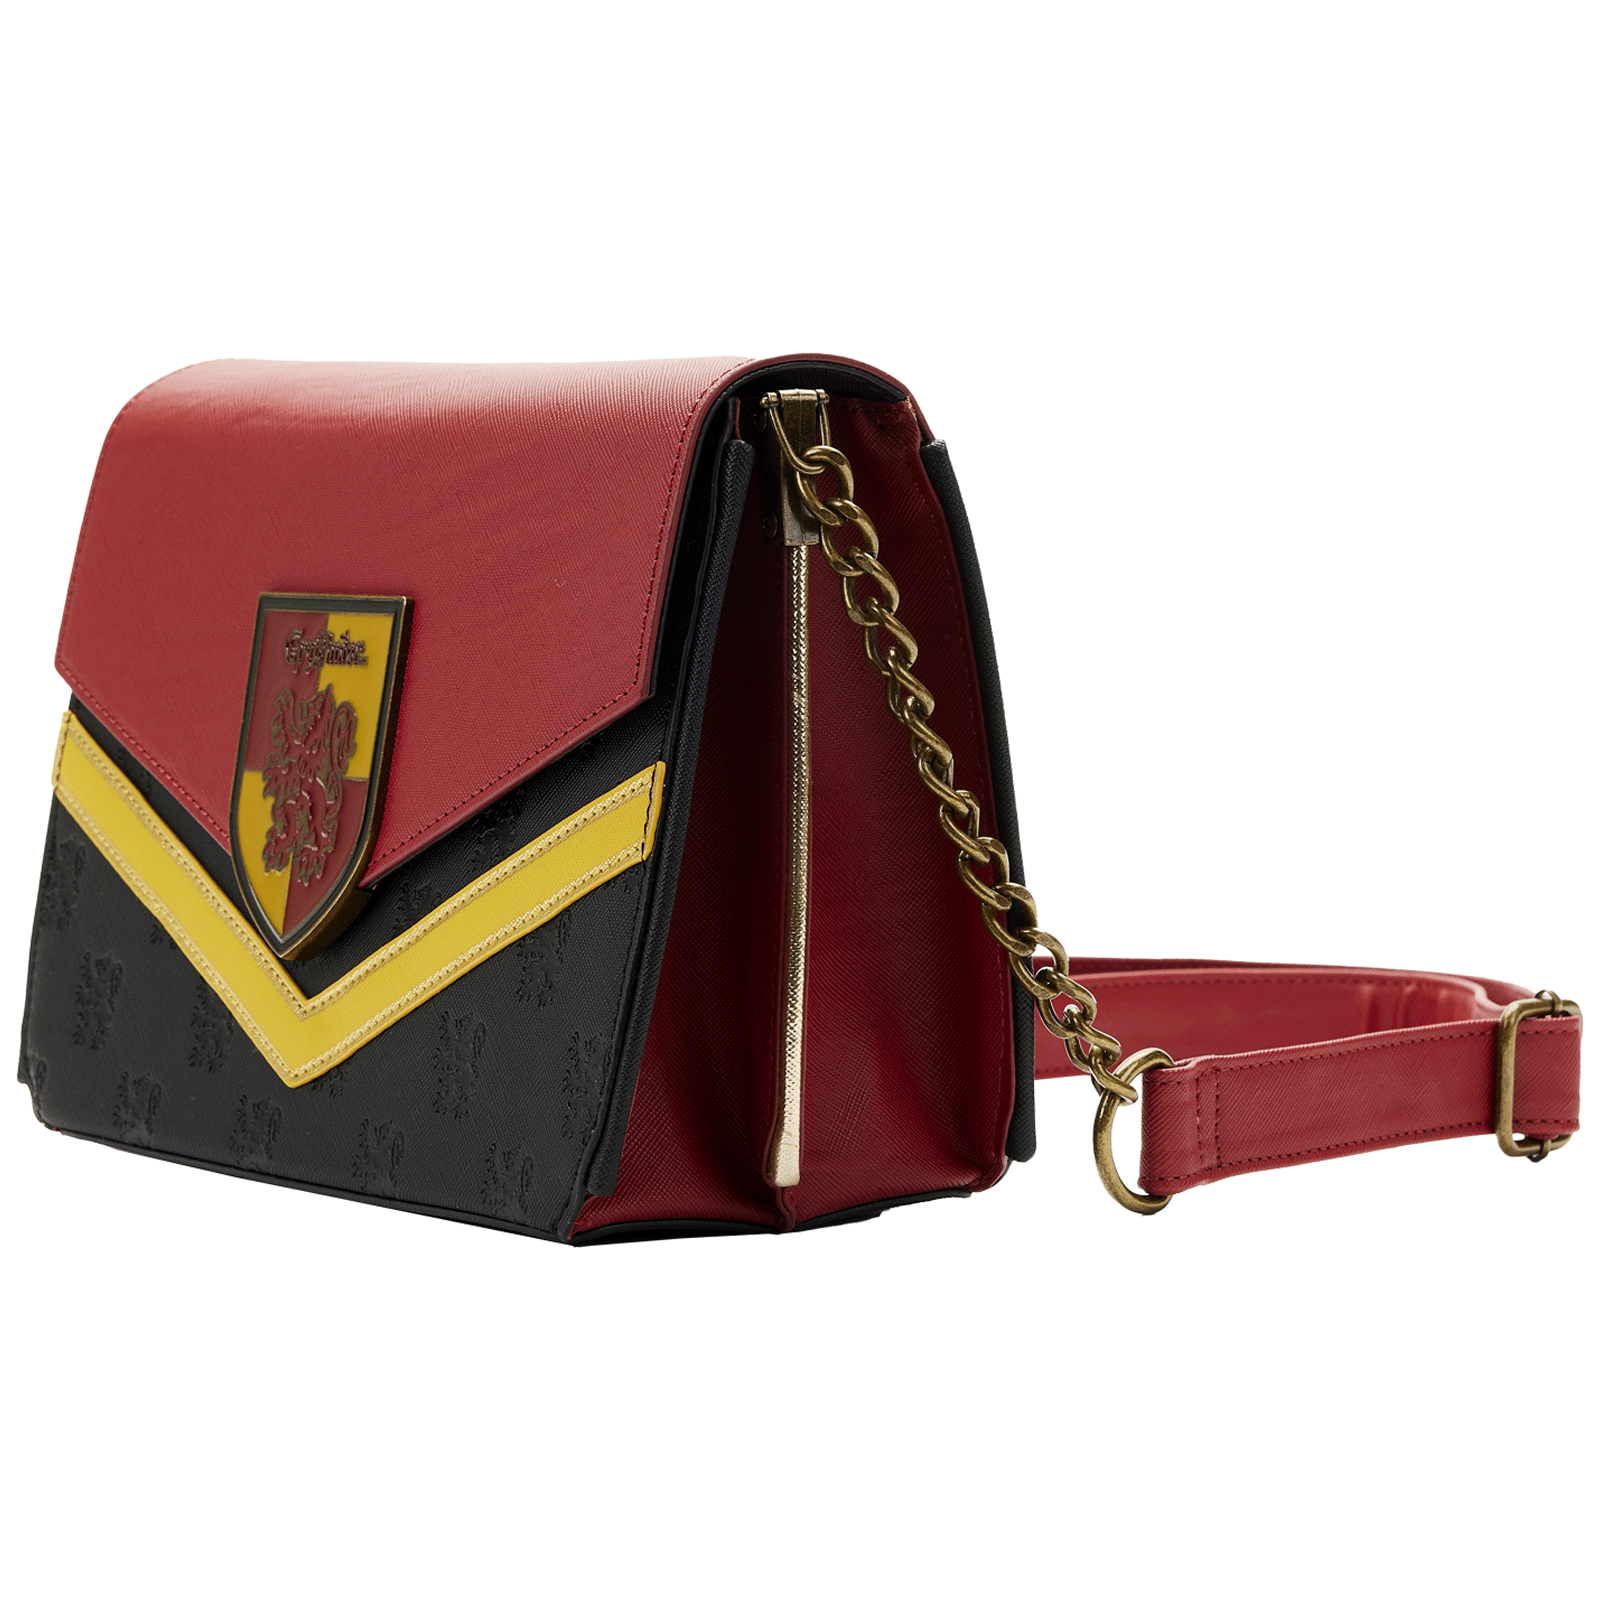 Loungefly x Harry Potter Gryffindor Chain Strap Crossbody Bag - GeekCore